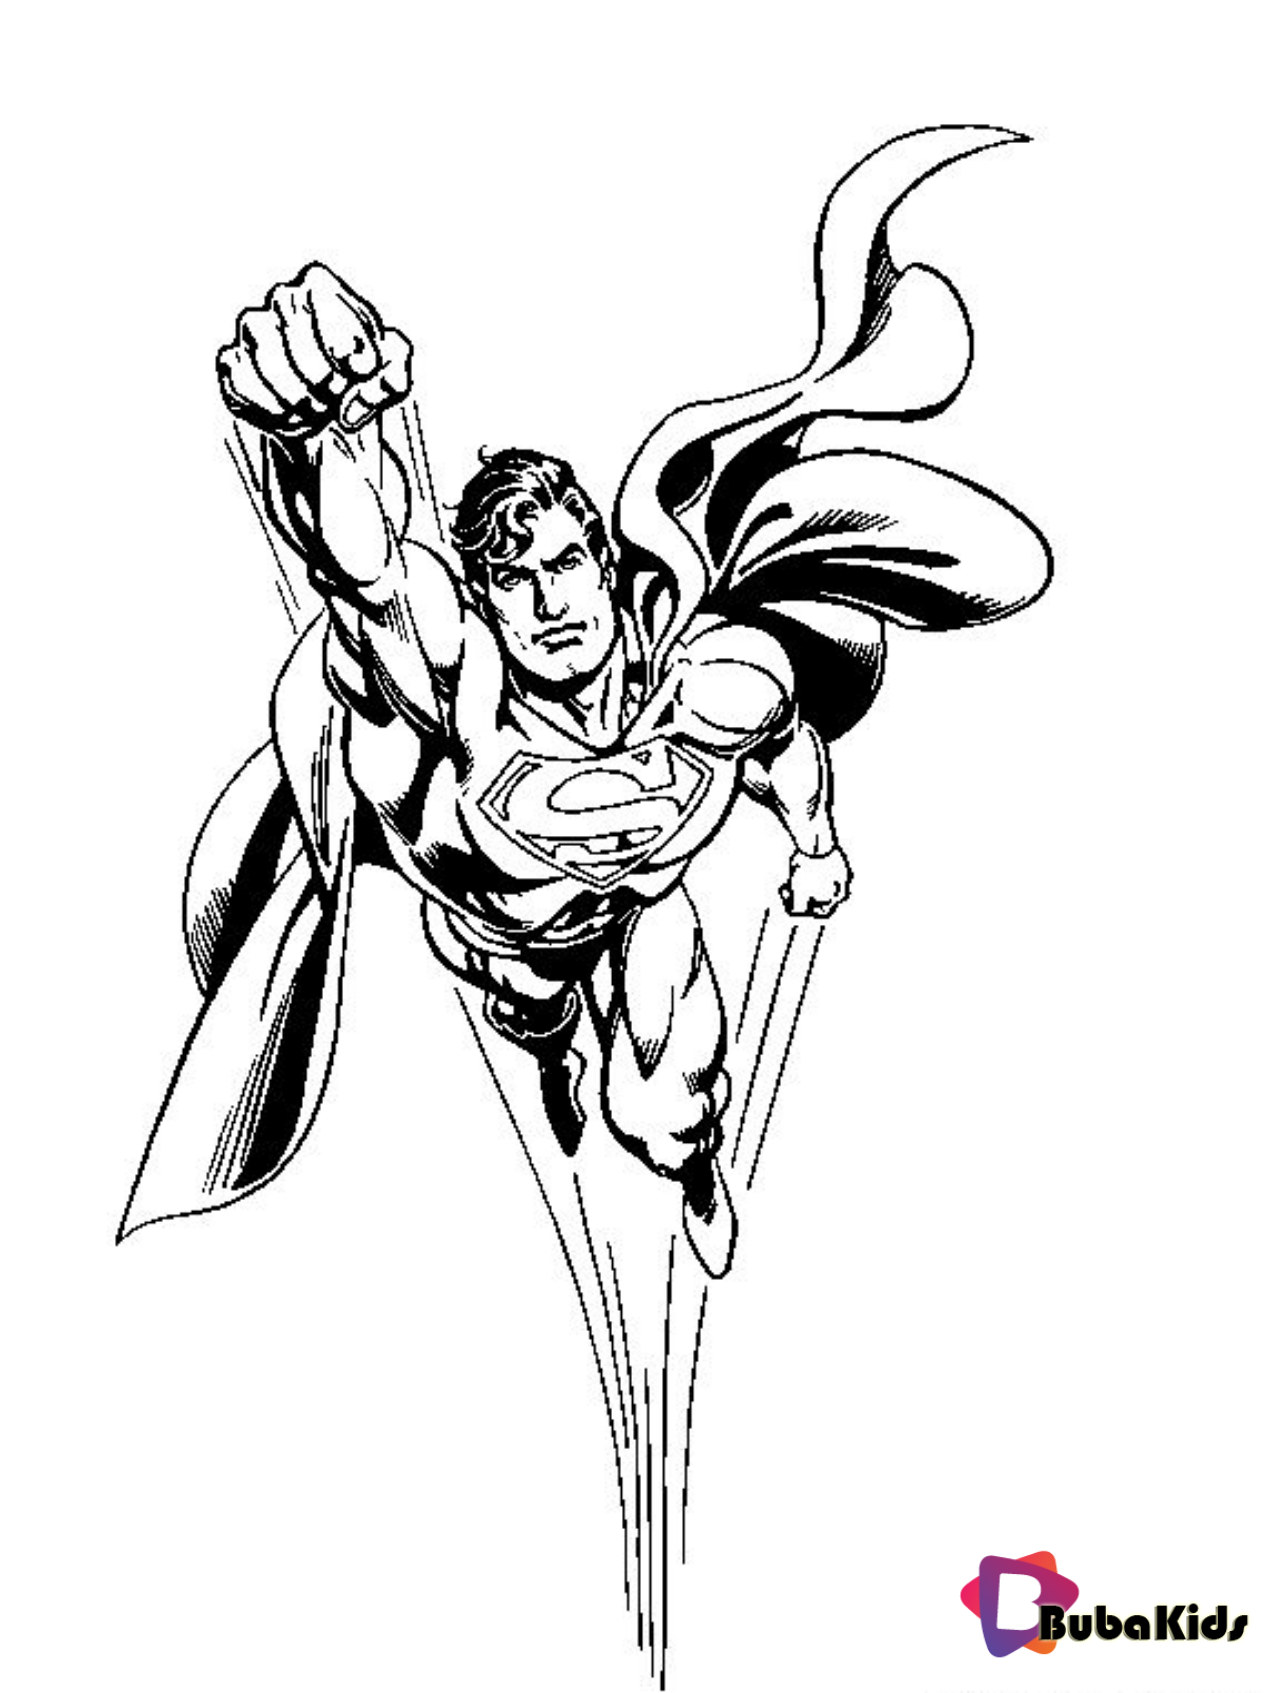 Superman Coloring page for kids Wallpaper